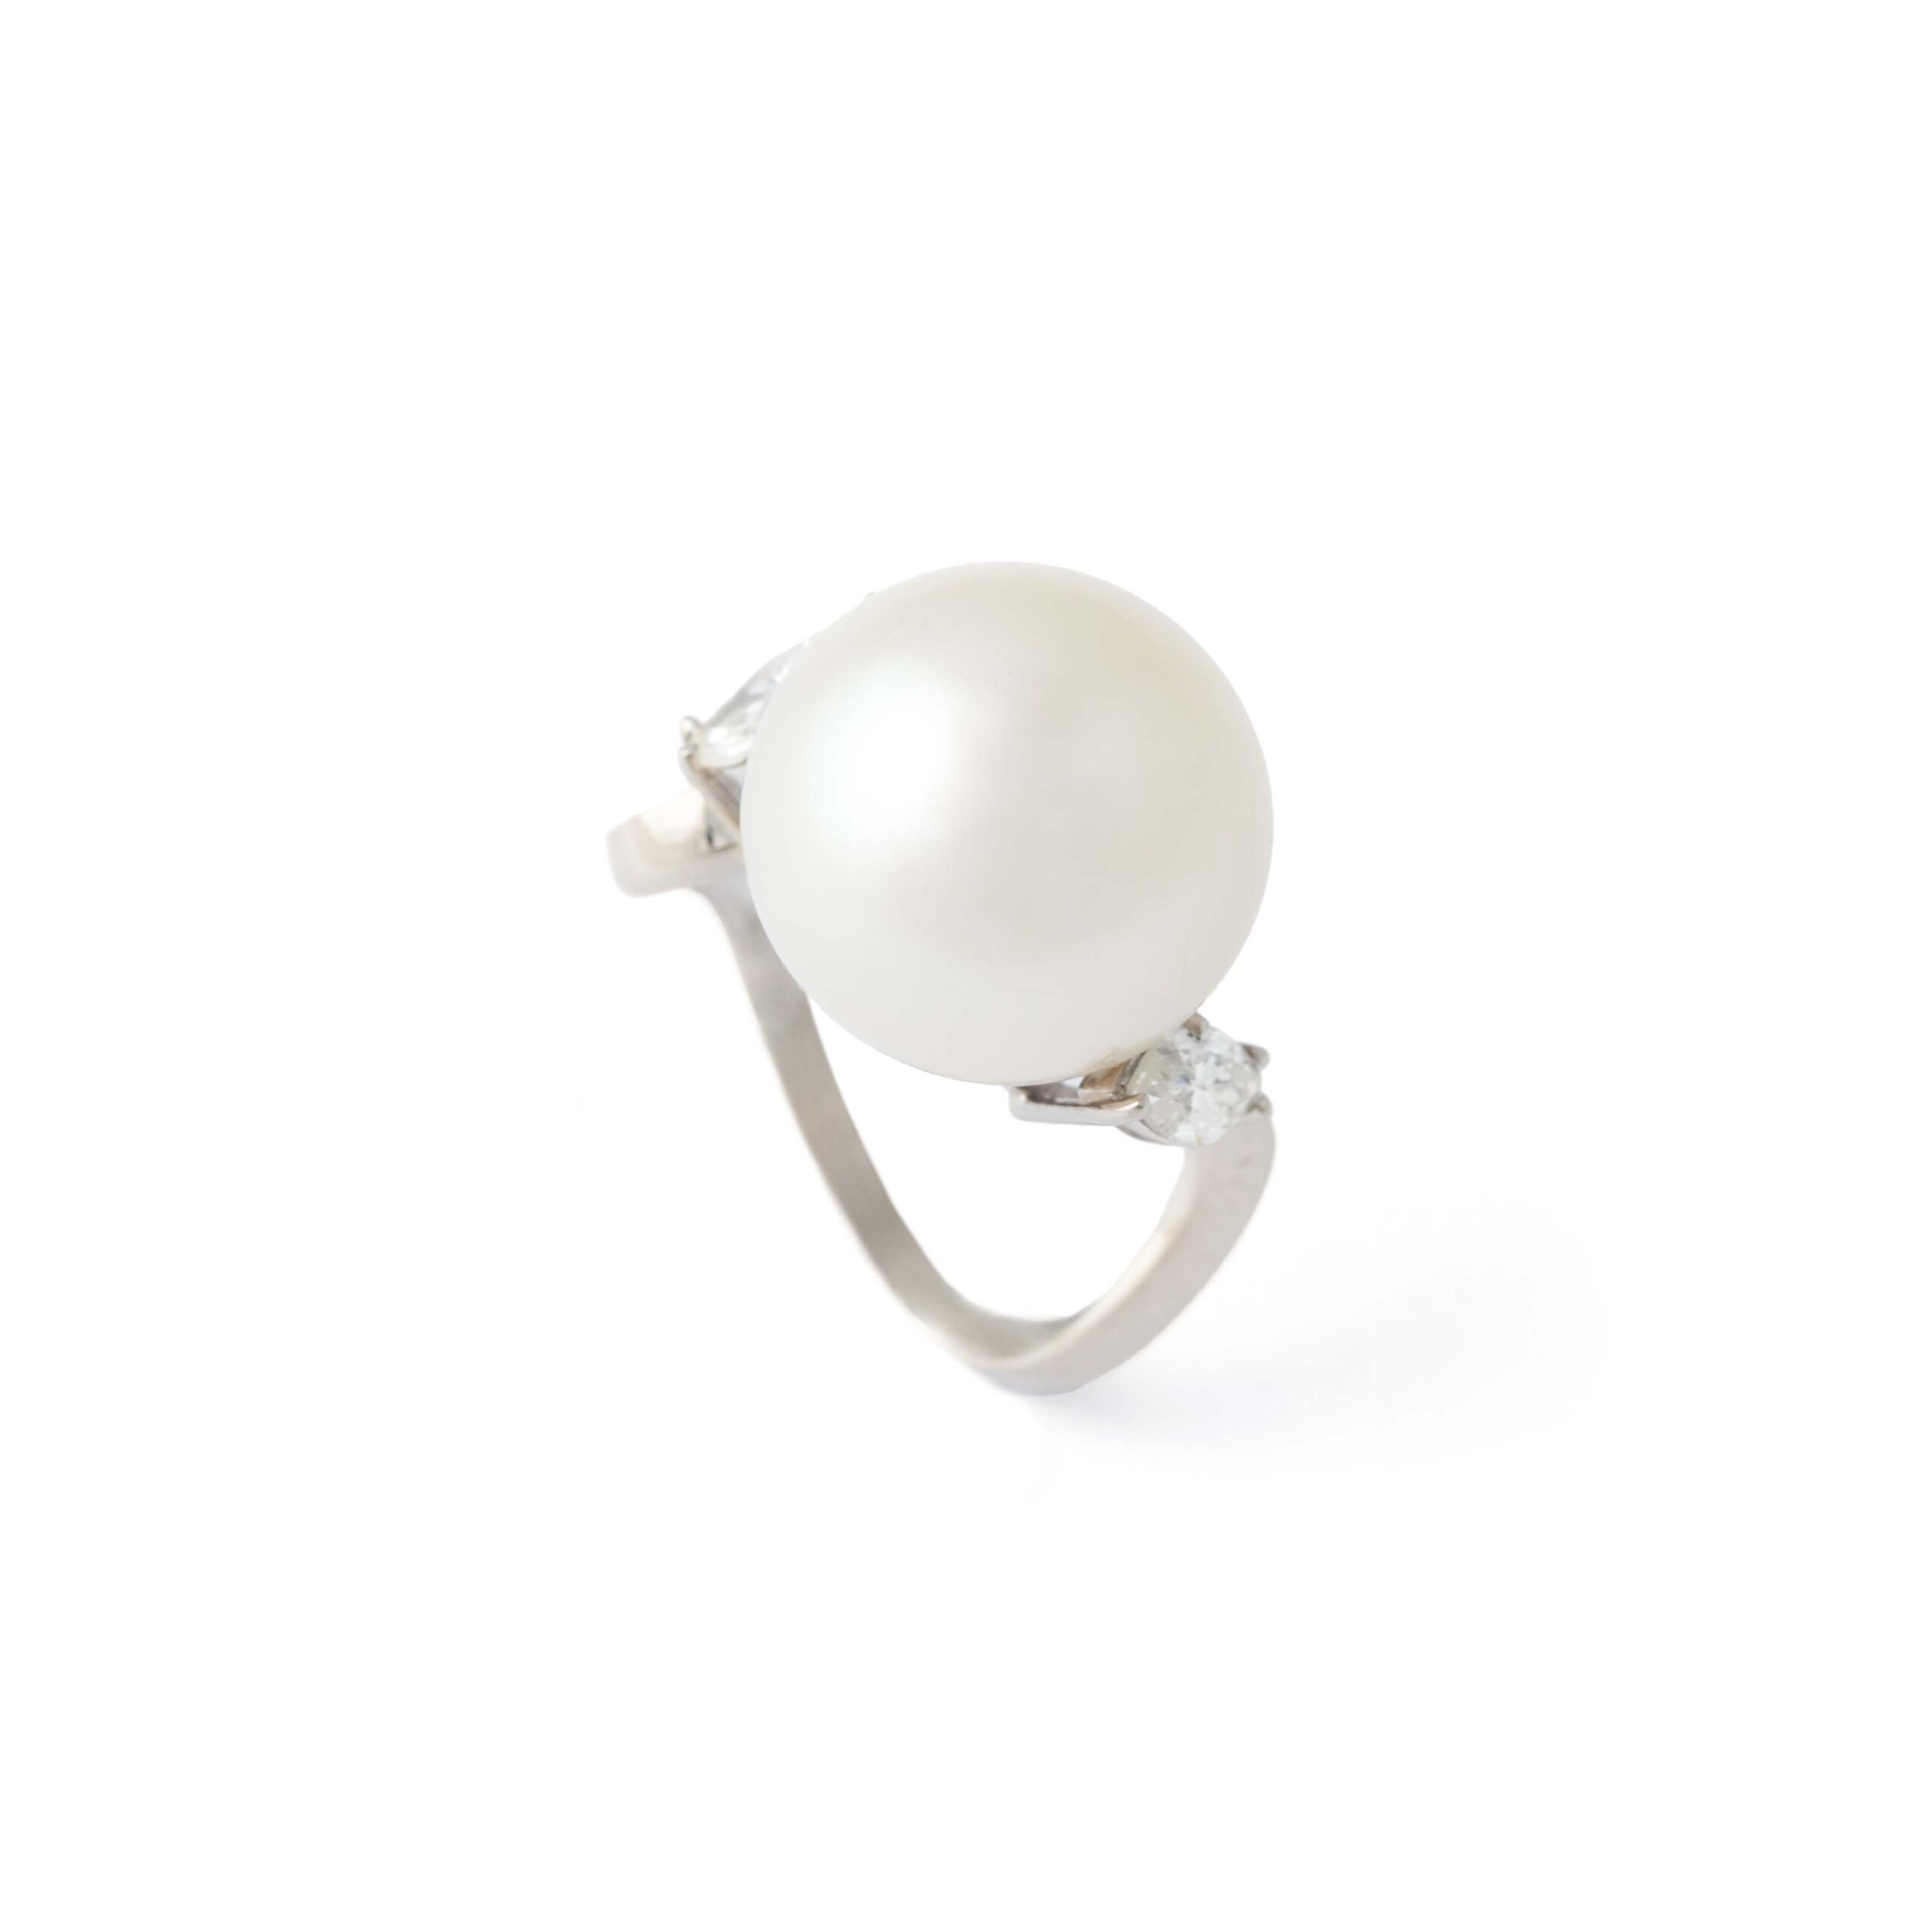 Front view Cultured Pearl Diamond White Gold Ring. Pearl dimensions: diameter 13,7 mm, 13,97 carats. Color white cream pinky. 2 Diamonds marquise cut 0,53 carat estimated E color, Clean.